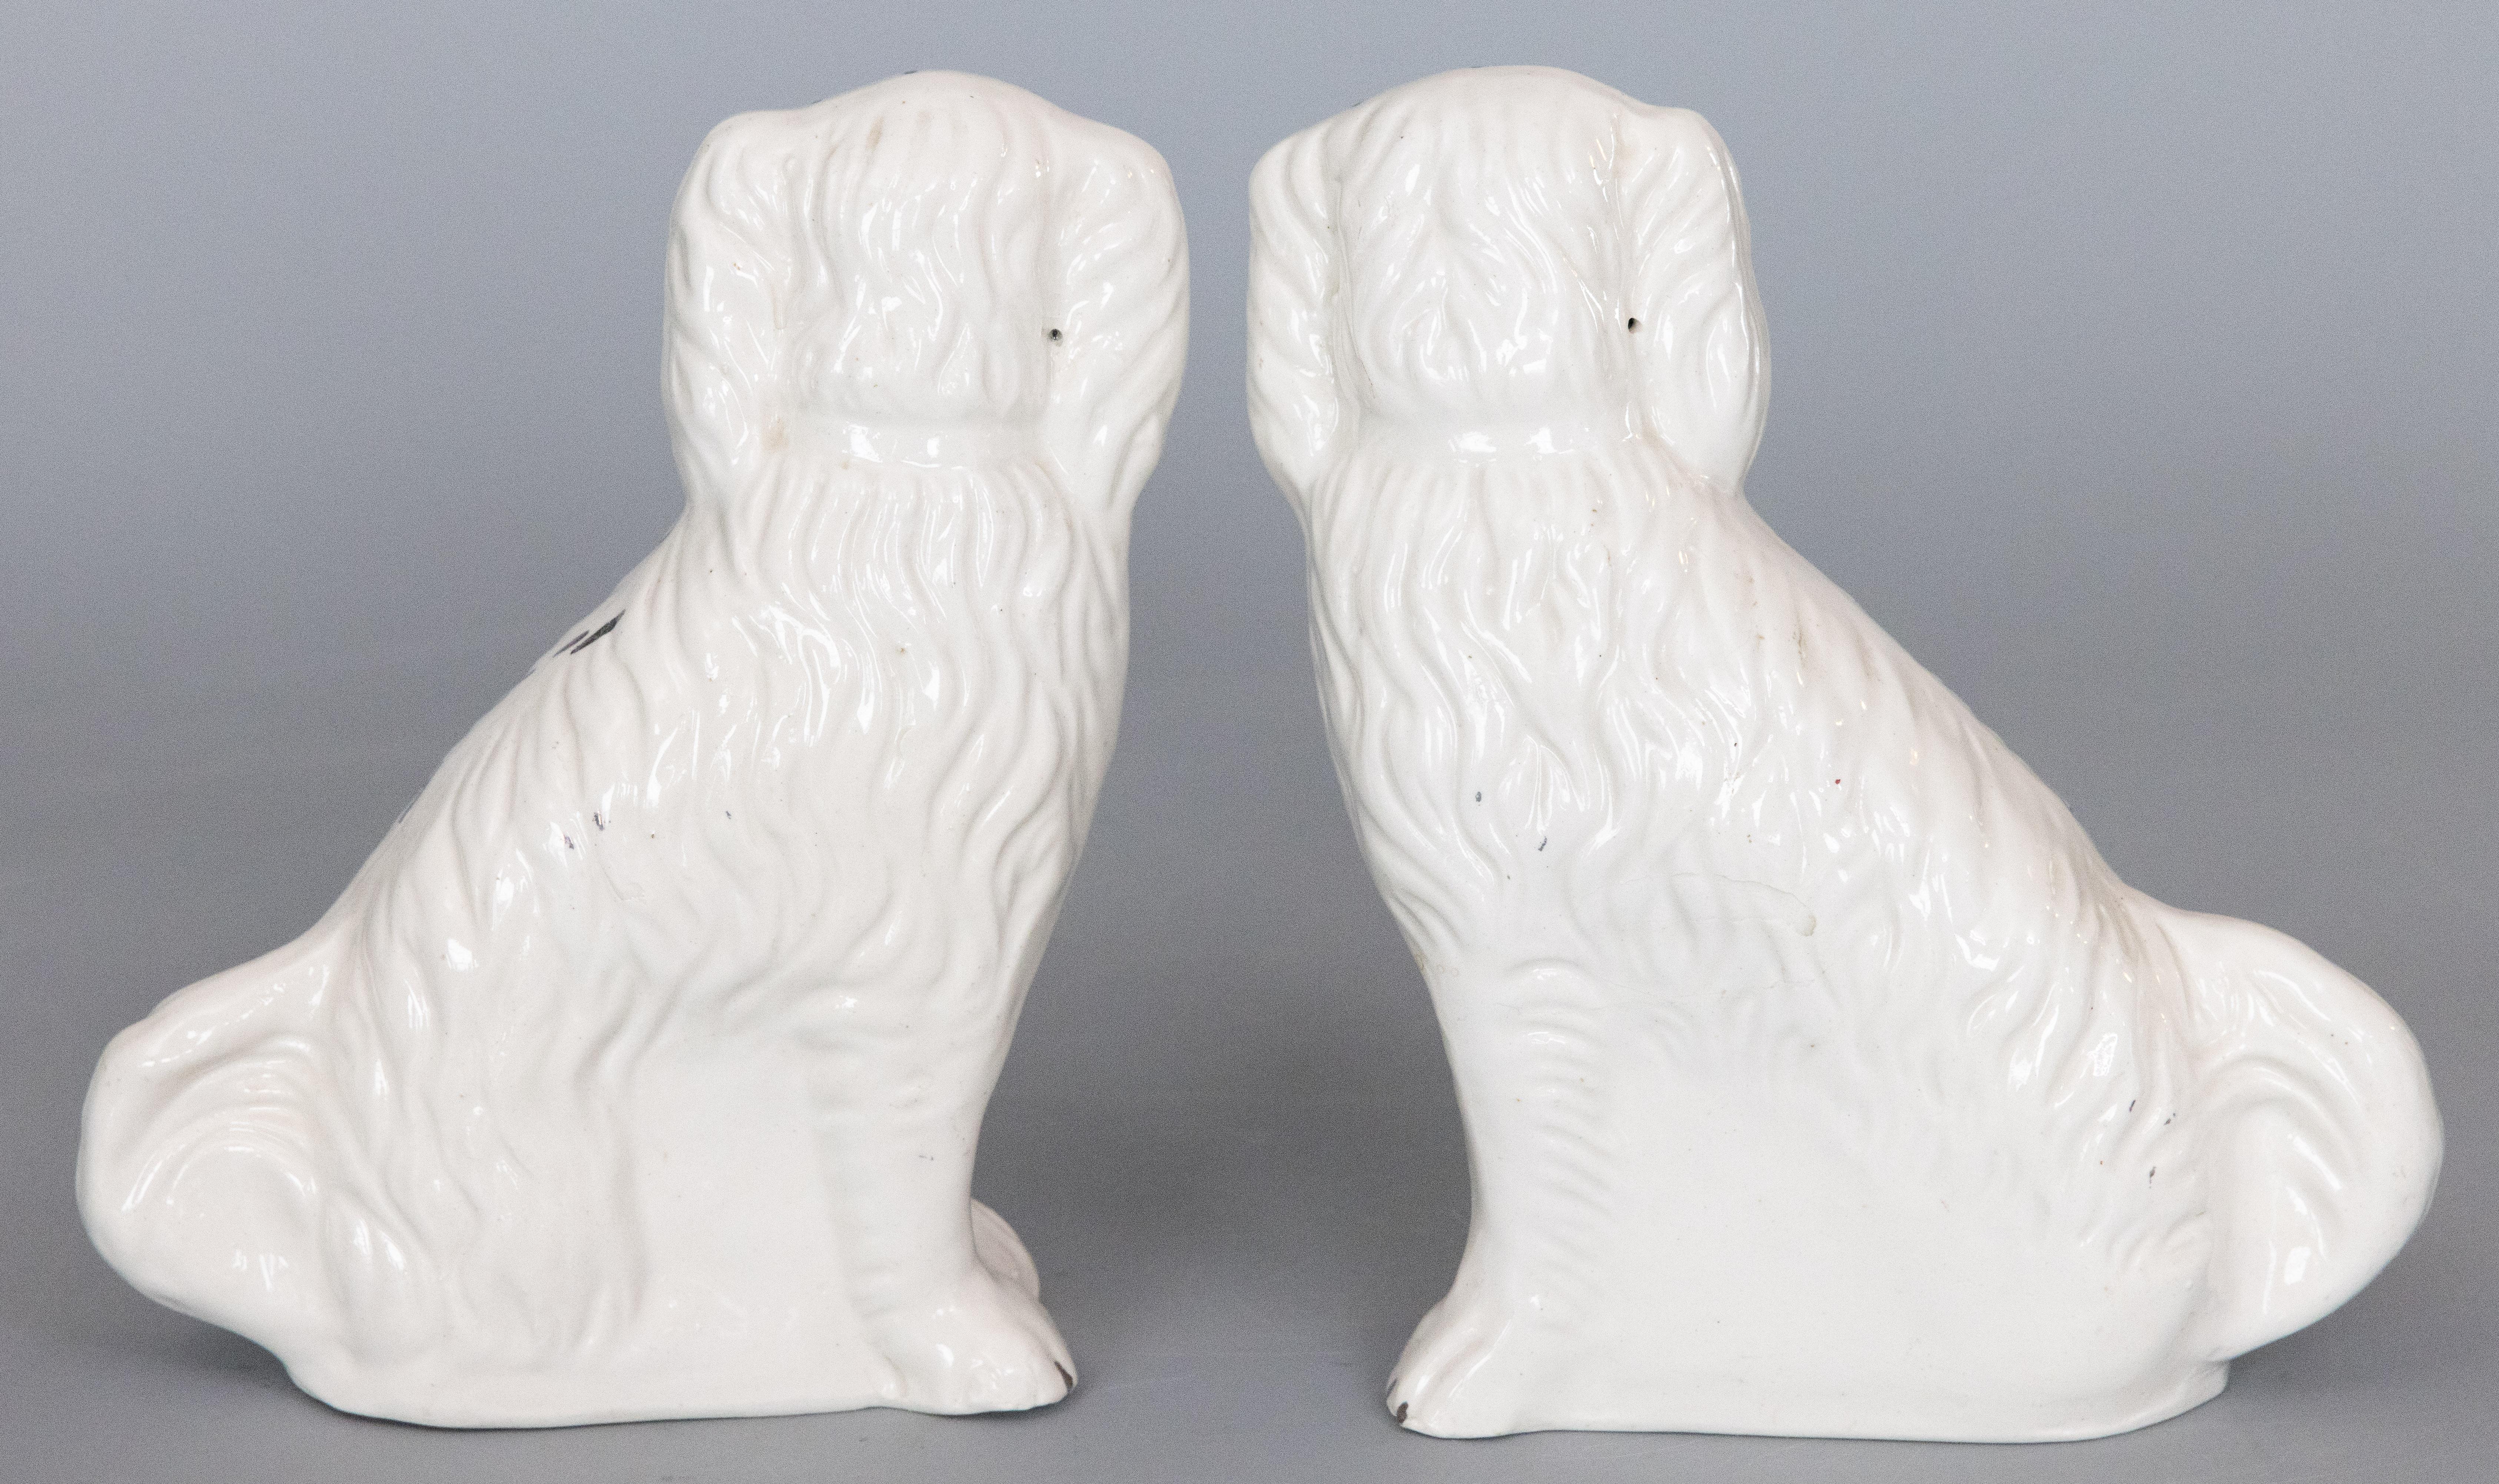 Ceramic Par of Antique Early 20th Century English Staffordshire Spaniel Dogs Figurines For Sale